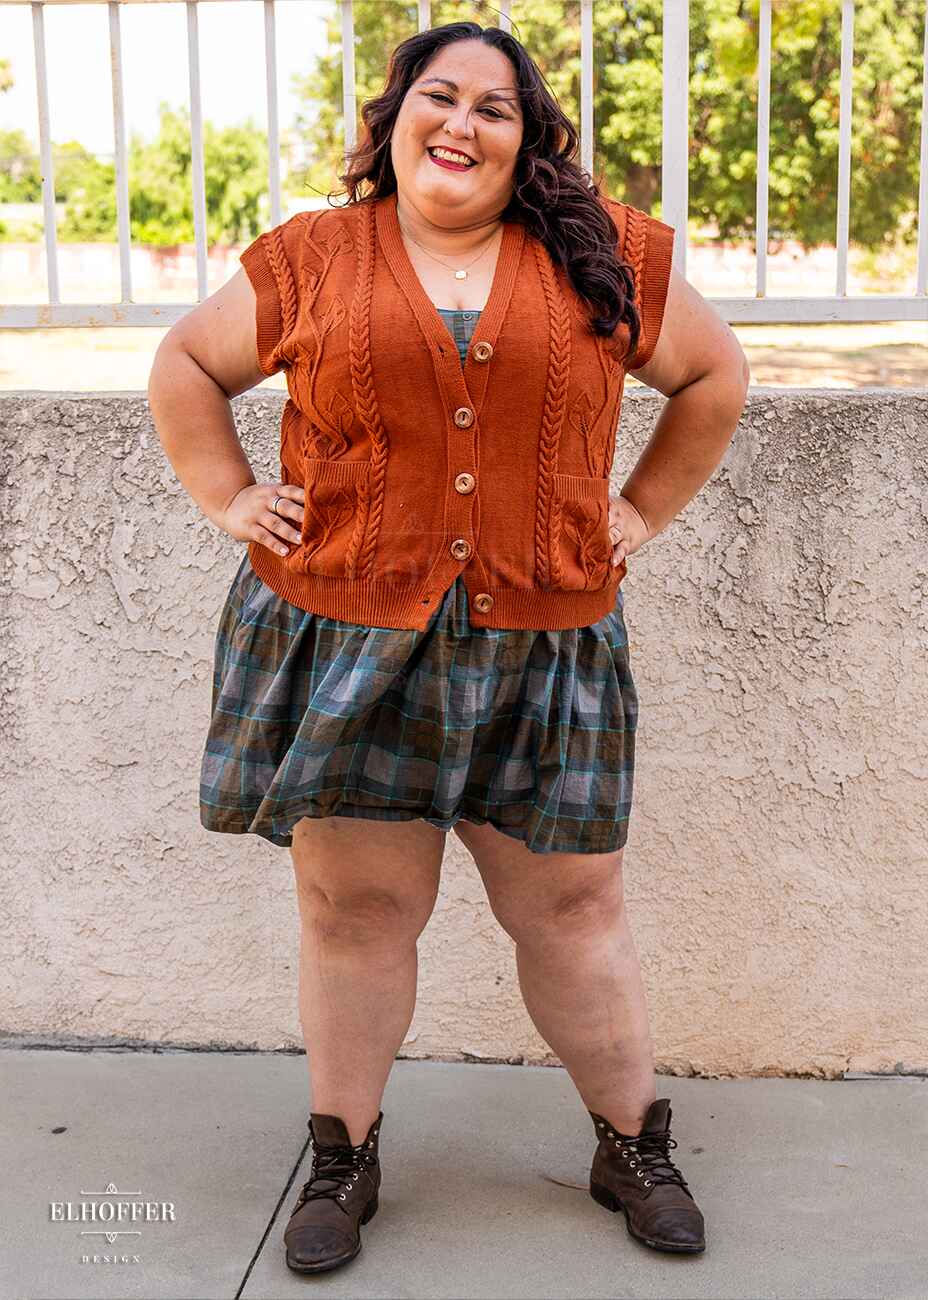 Alysia, a sun kissed skin 2xl model with long dark brown curly hair, is smilling while wearing a pumpkin orange button up knit vest with a leafy vine and cable knit pattern, light brown buttons, and front pockets.